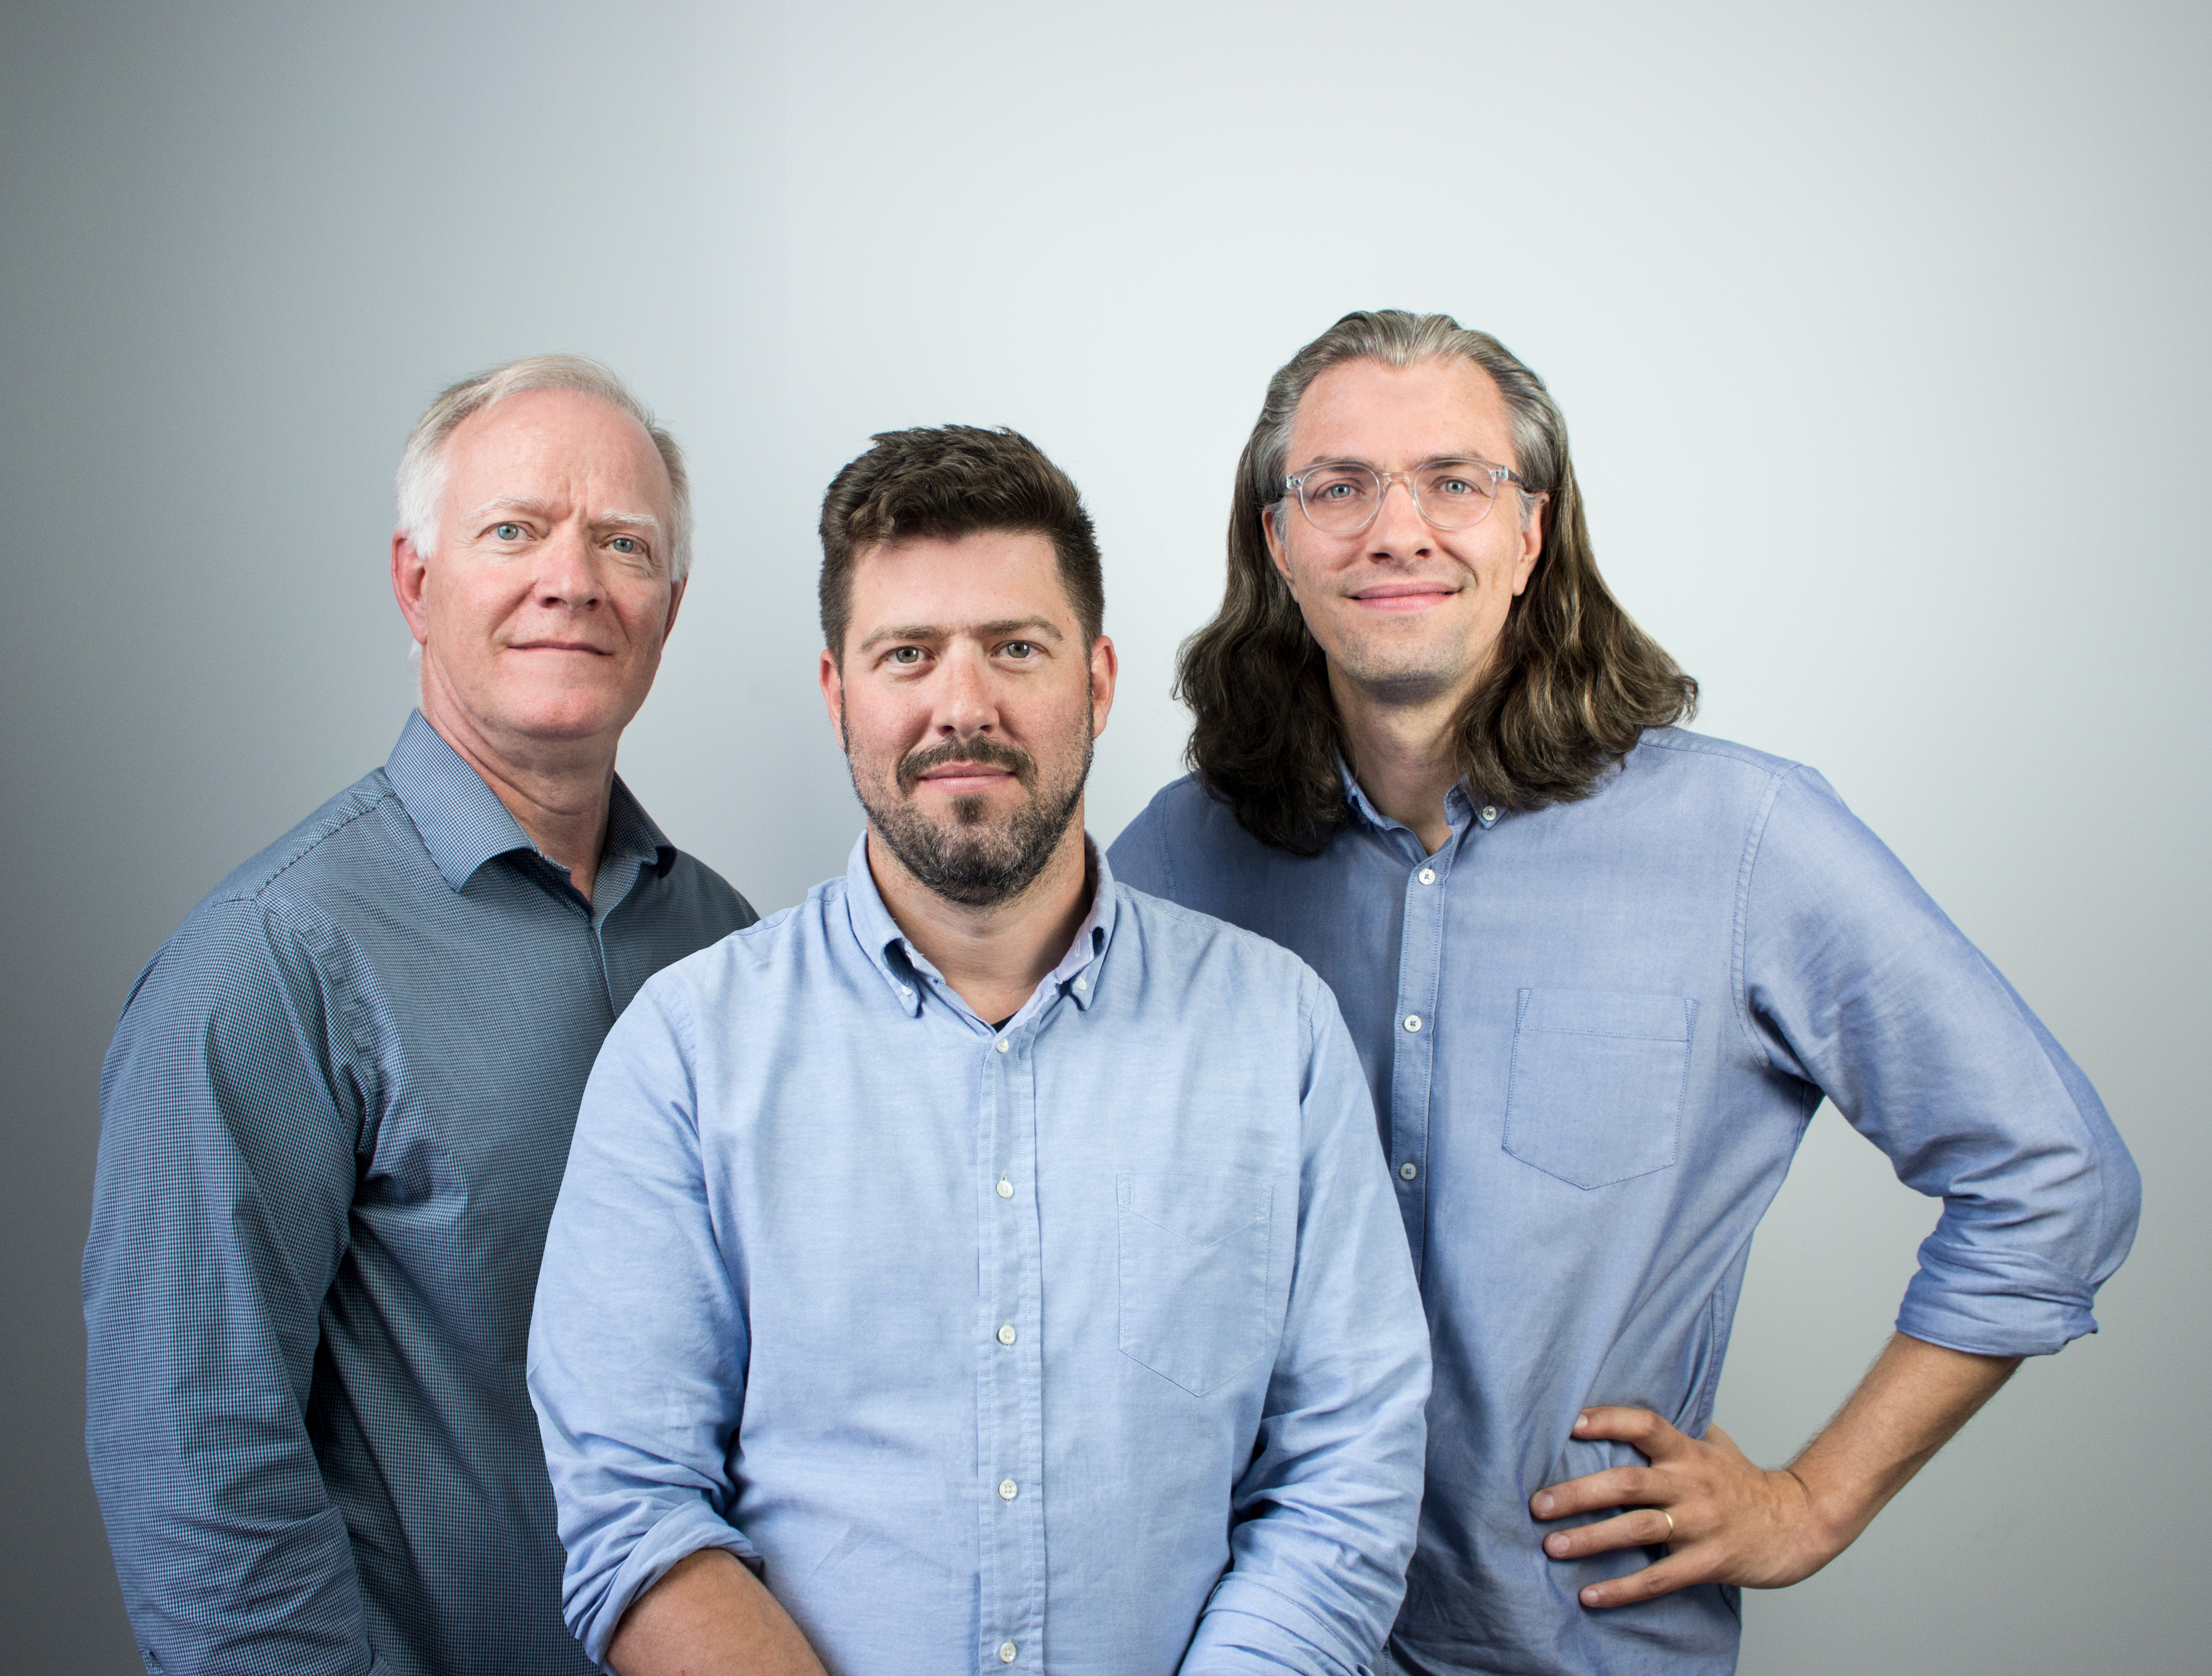 From left to right: Classcraft Co-Founders Lauren Young (CFO), Shawn Young (CEO), and Devin Young (President and Chief Innovation Officer).